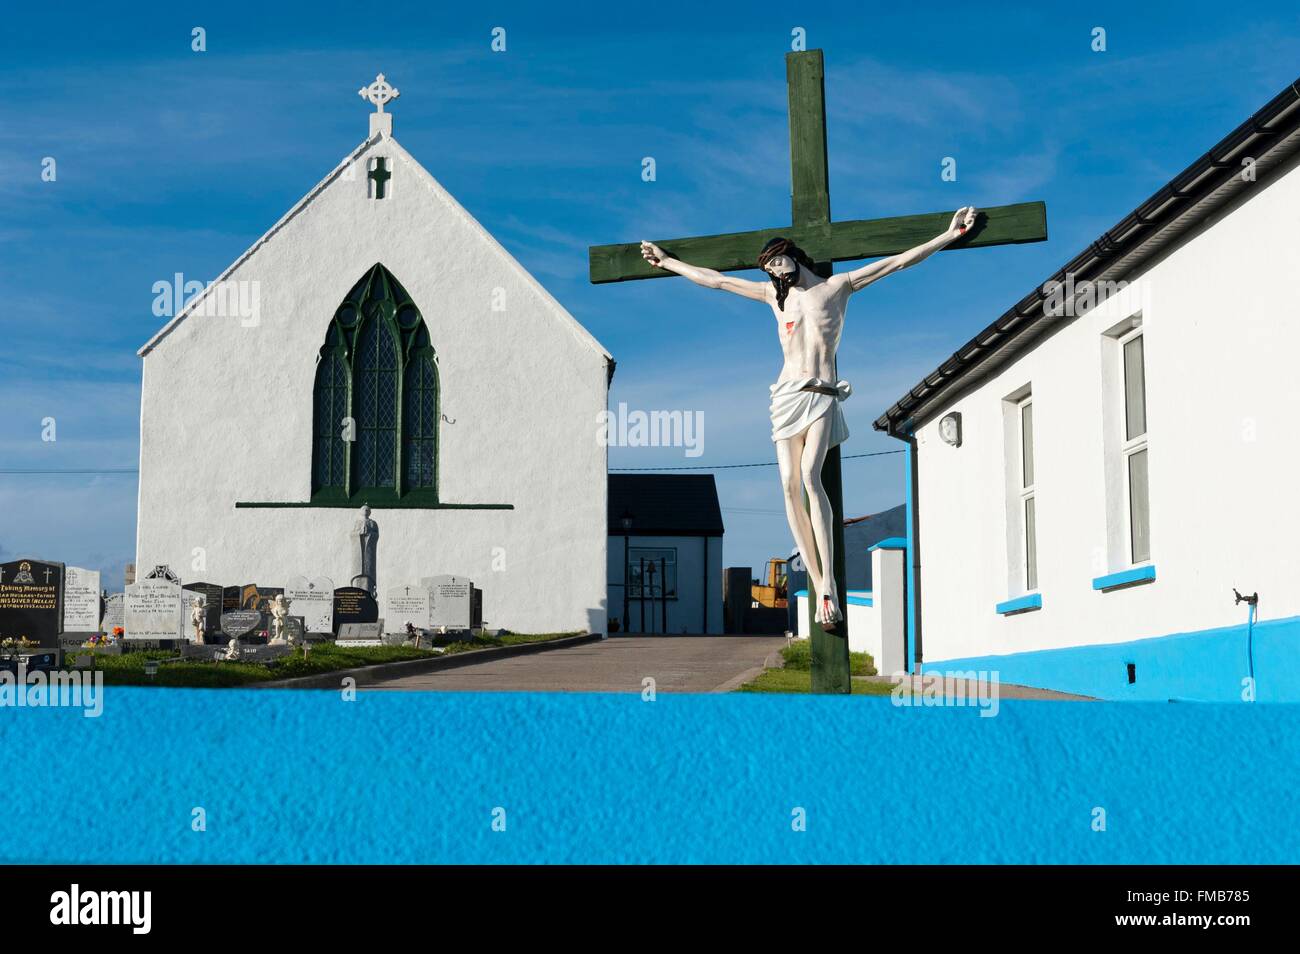 Ireland, County Donegal, Tory Island, Christ on the cross, church and cemetery, blue wall Stock Photo